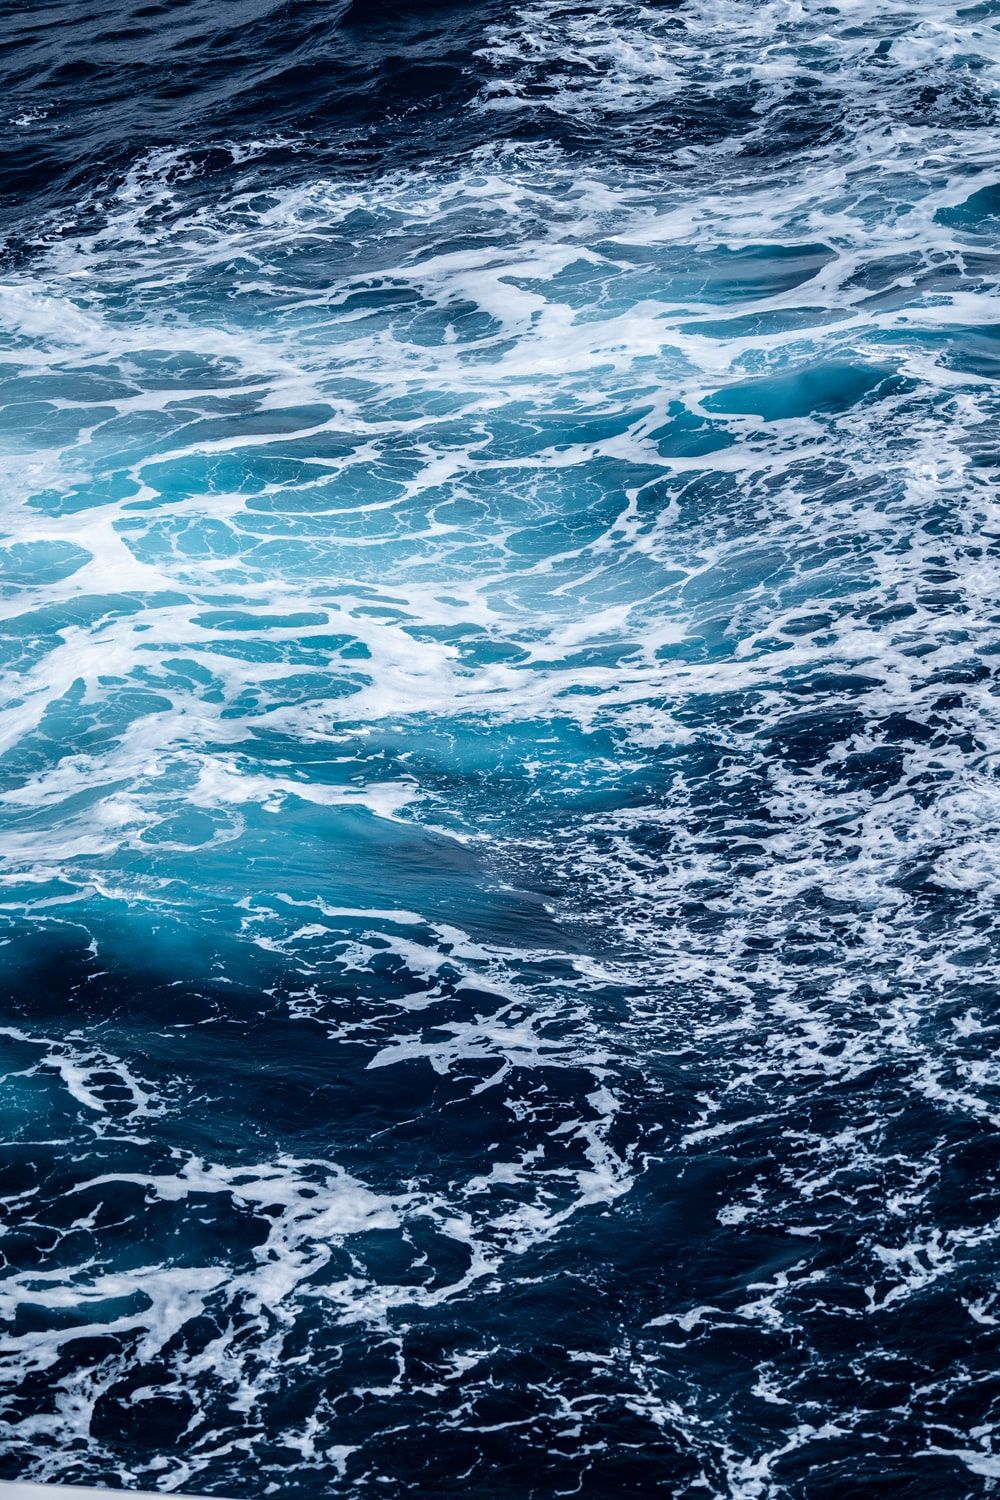 Wild Sea Picture. Download Free Image